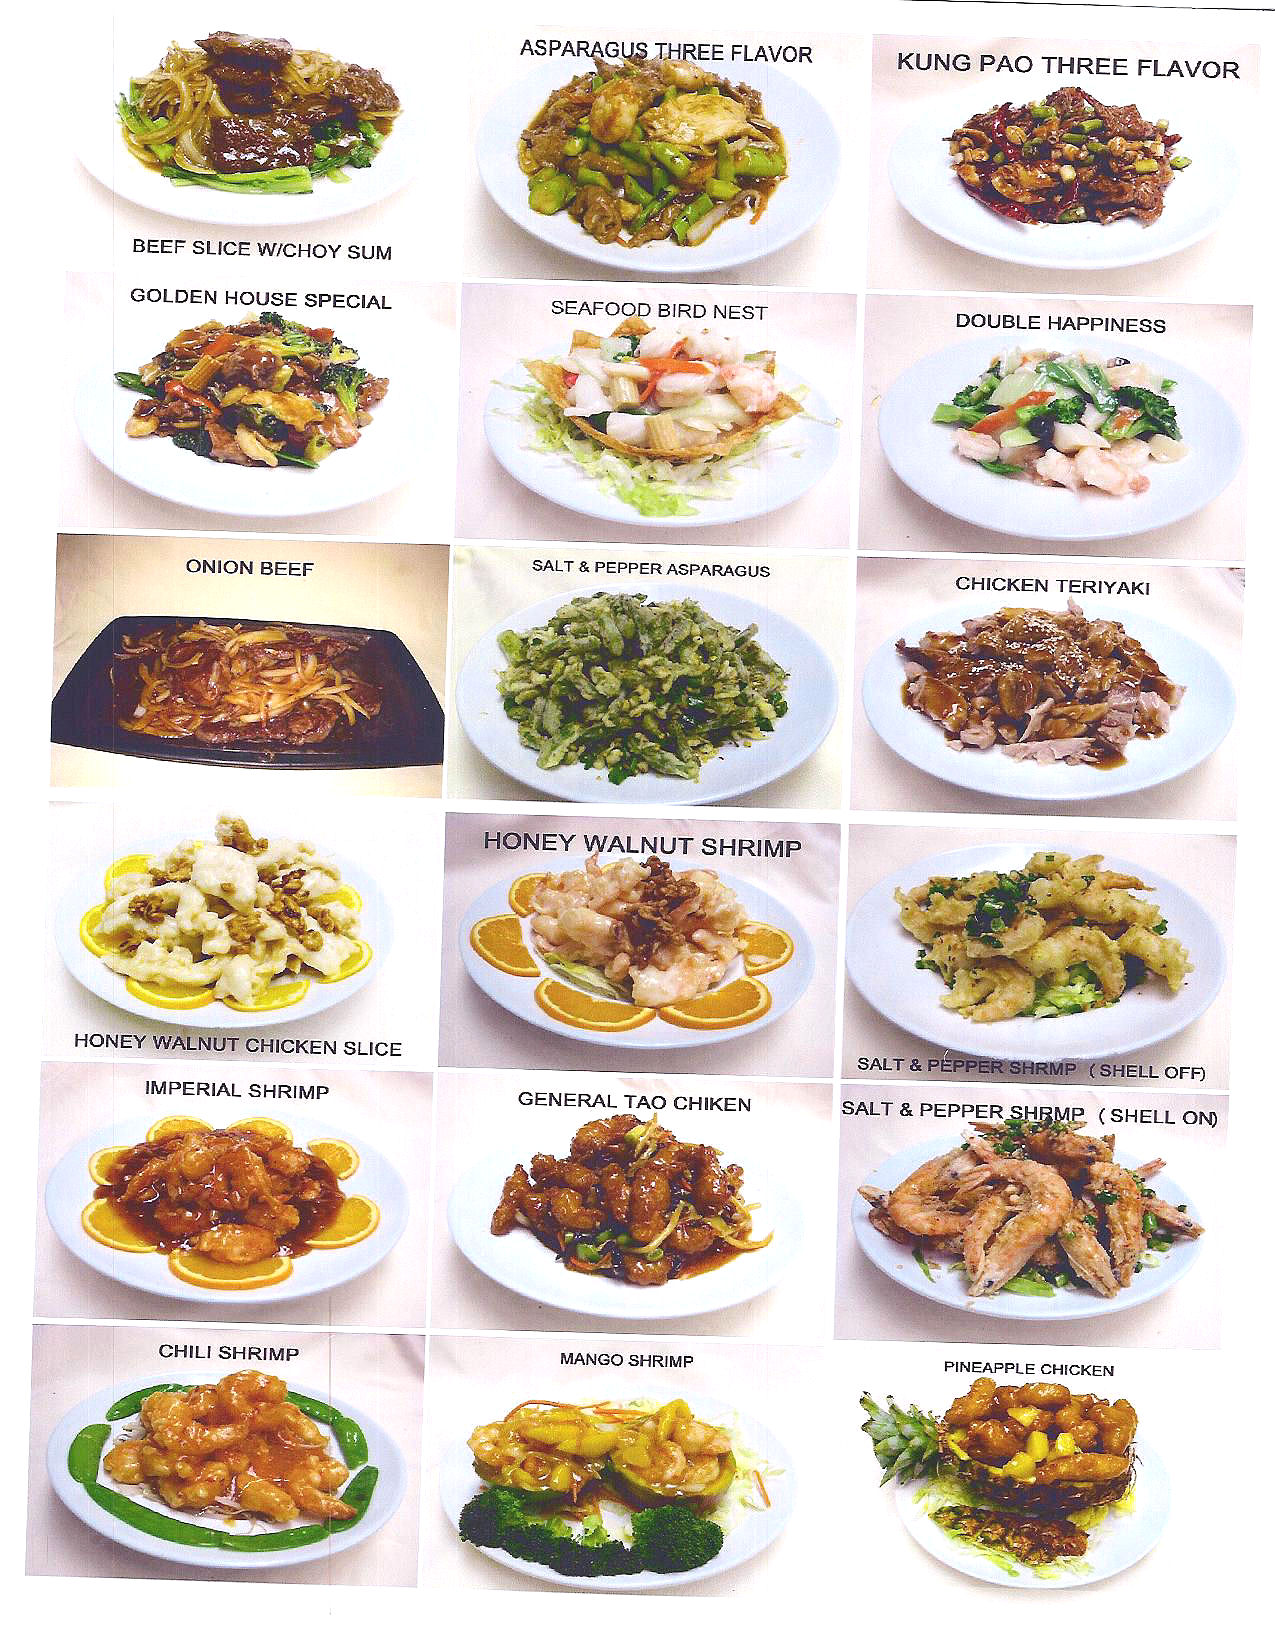 Chinese Restaurant Menu Chinese Food Menu Pictures - Rezfoods - Resep ...